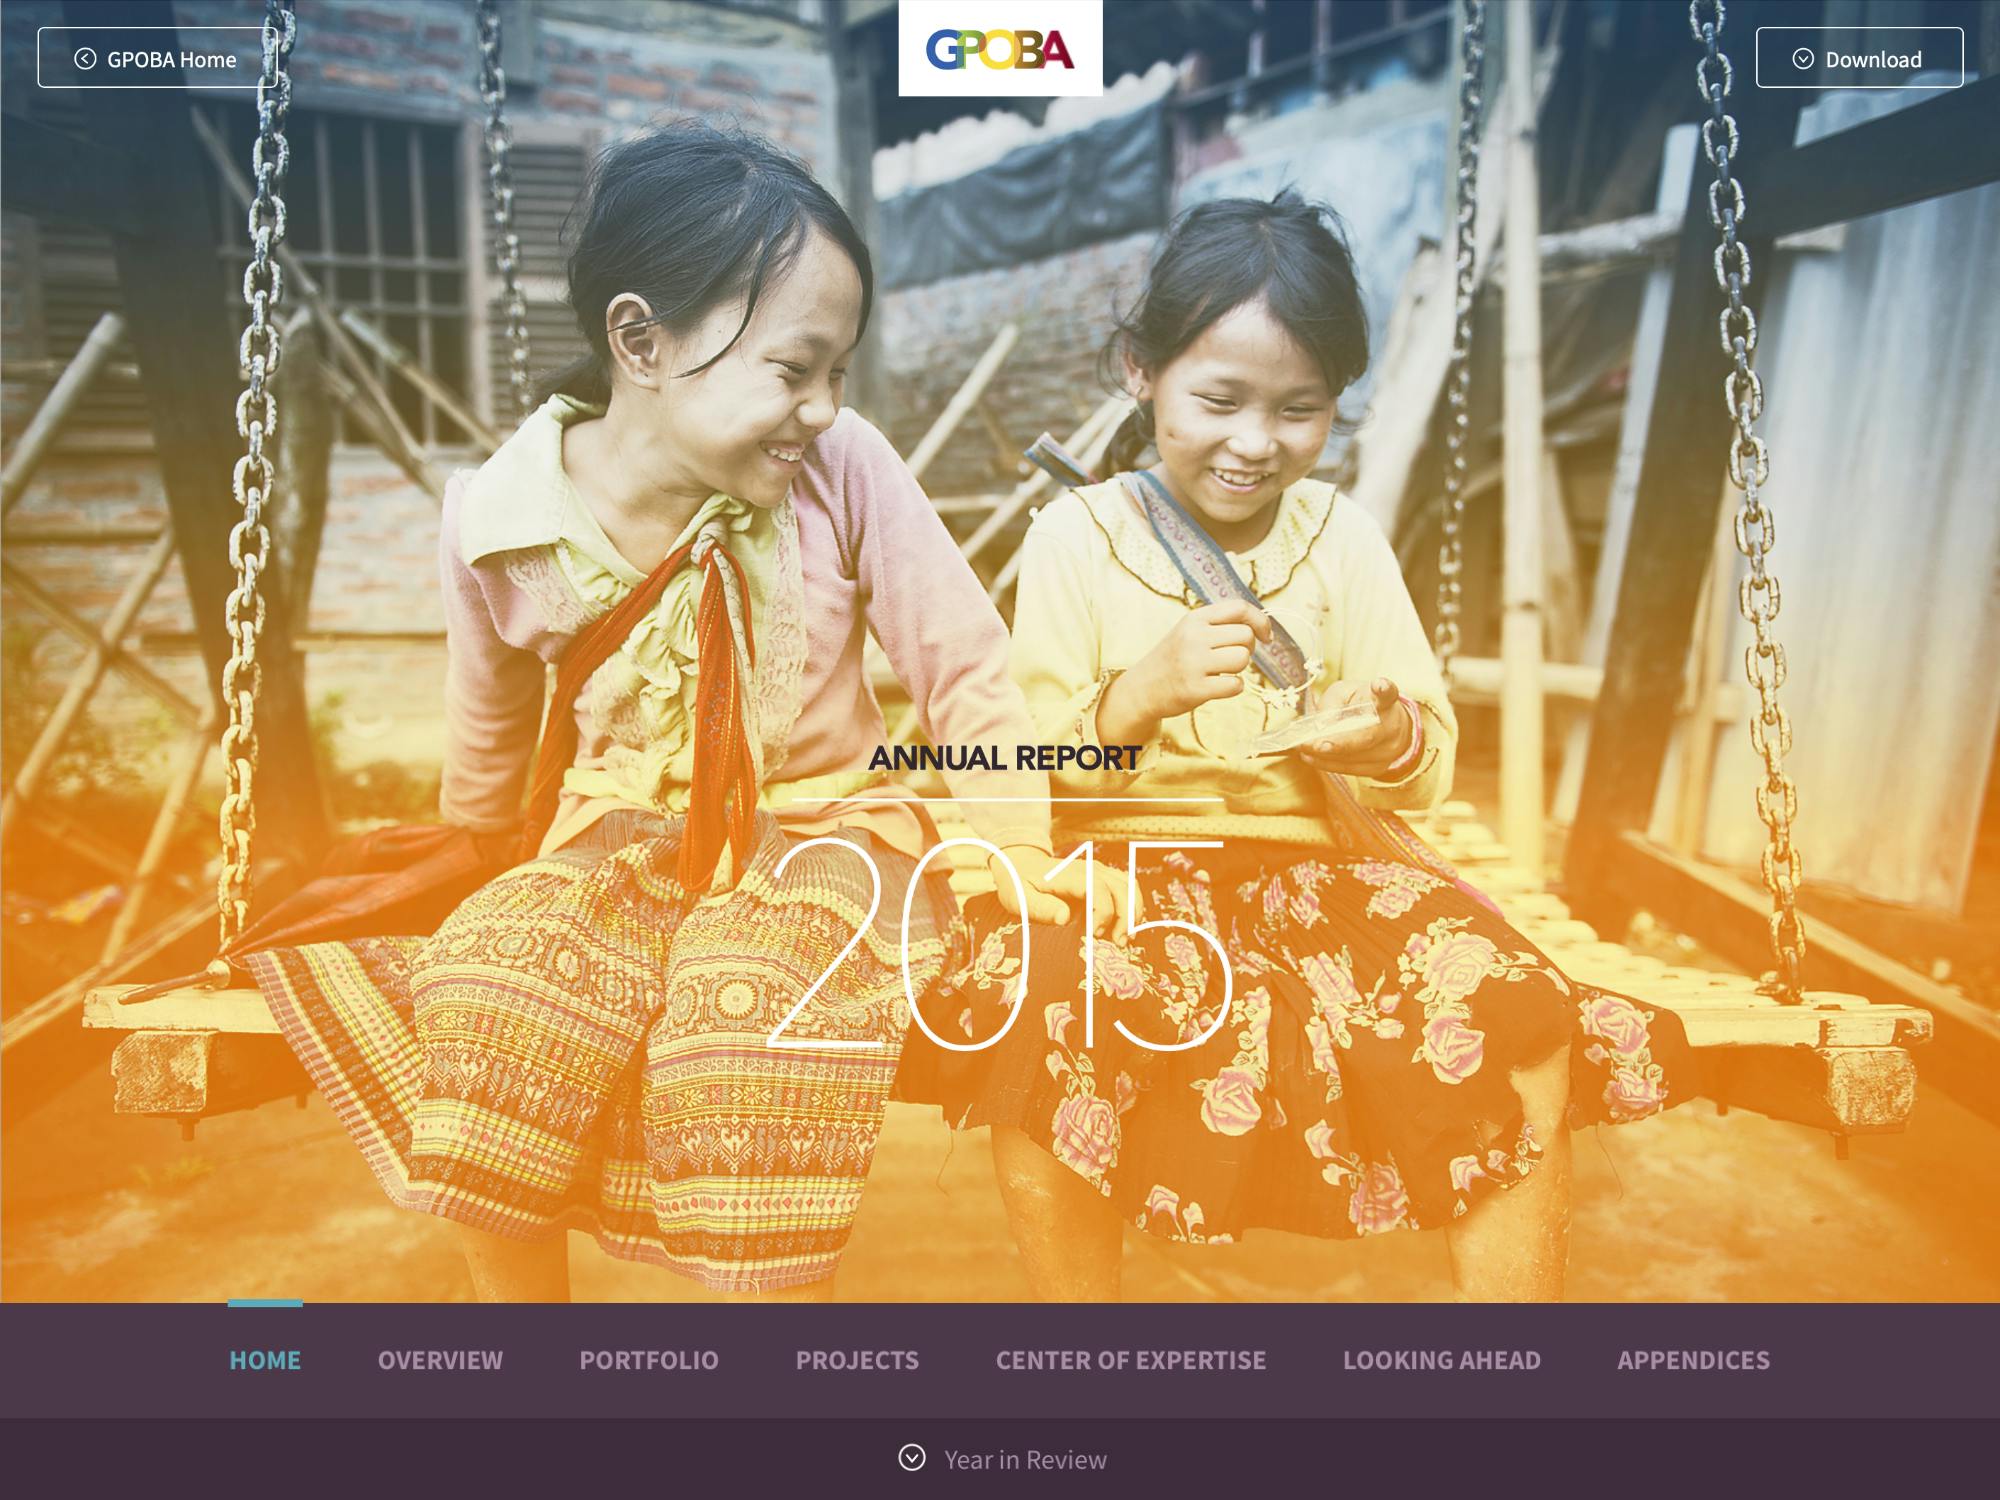 The cover of the digital version of GPOBA’s annual report